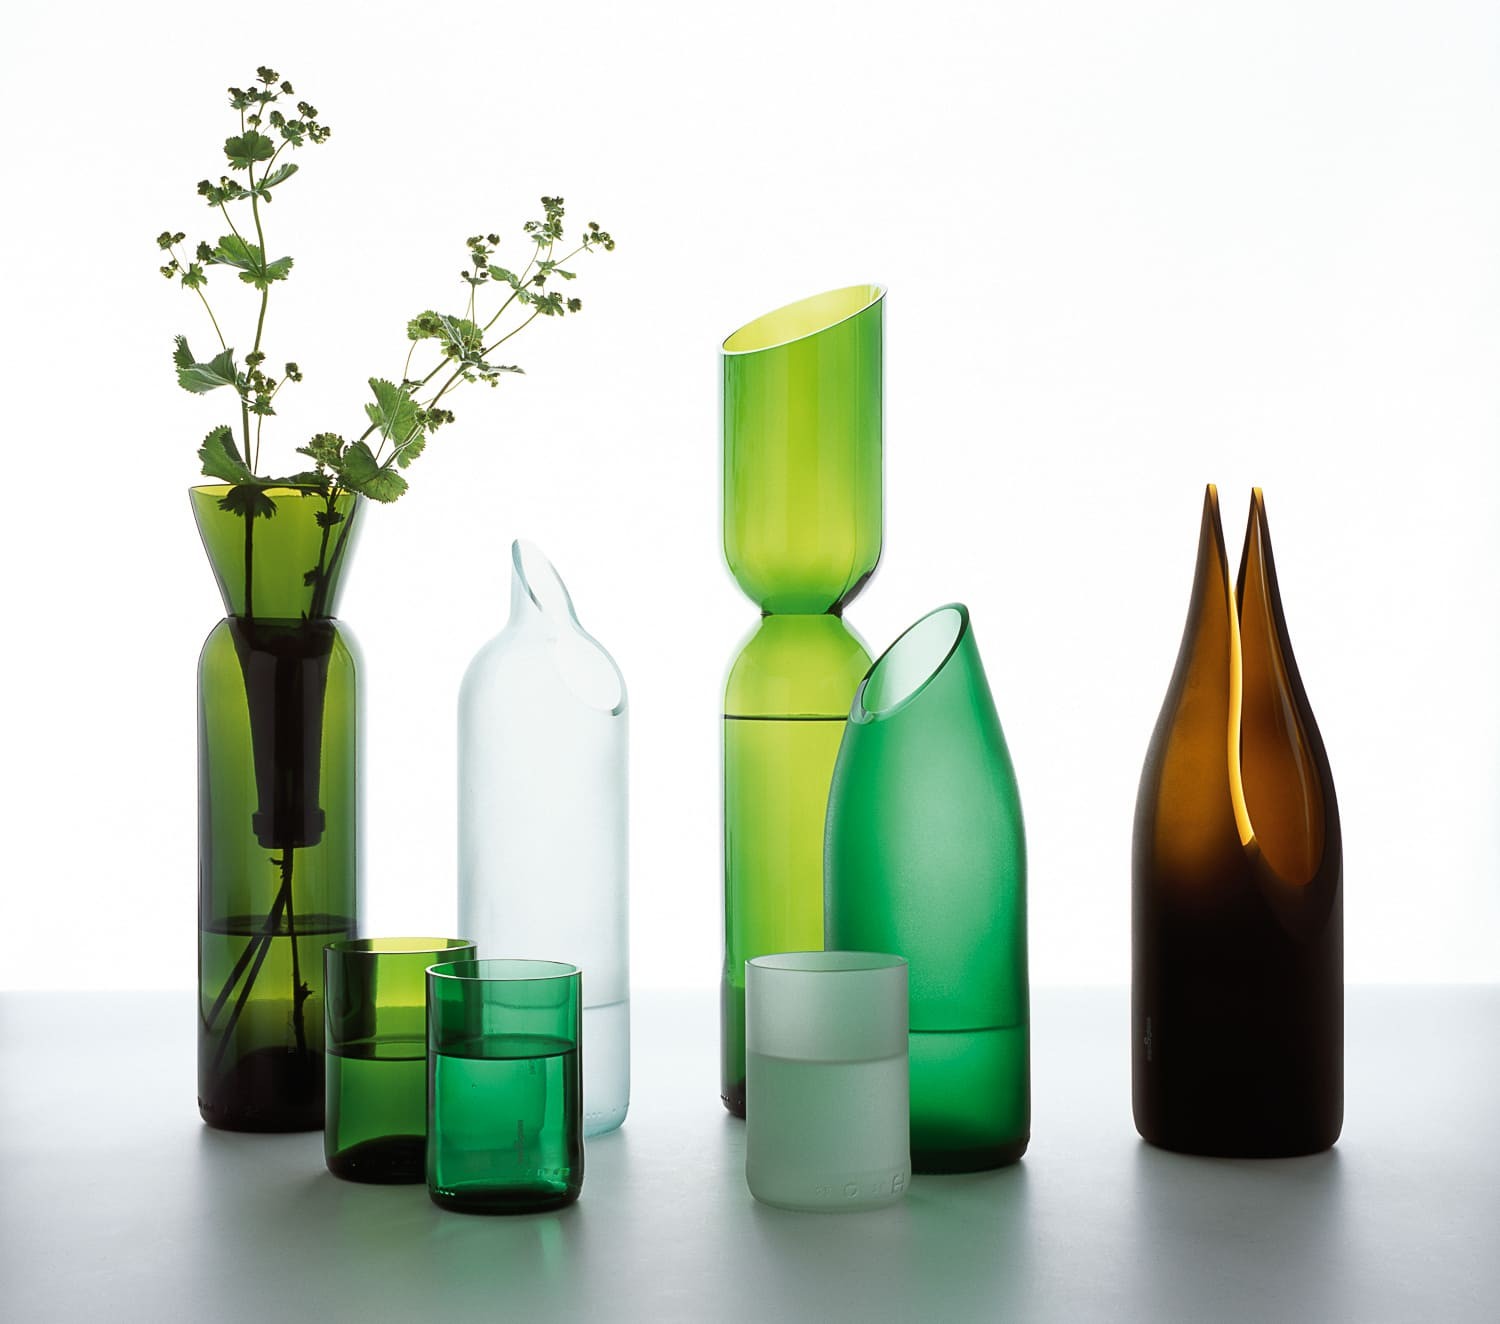 How are Glass Bottles Made?